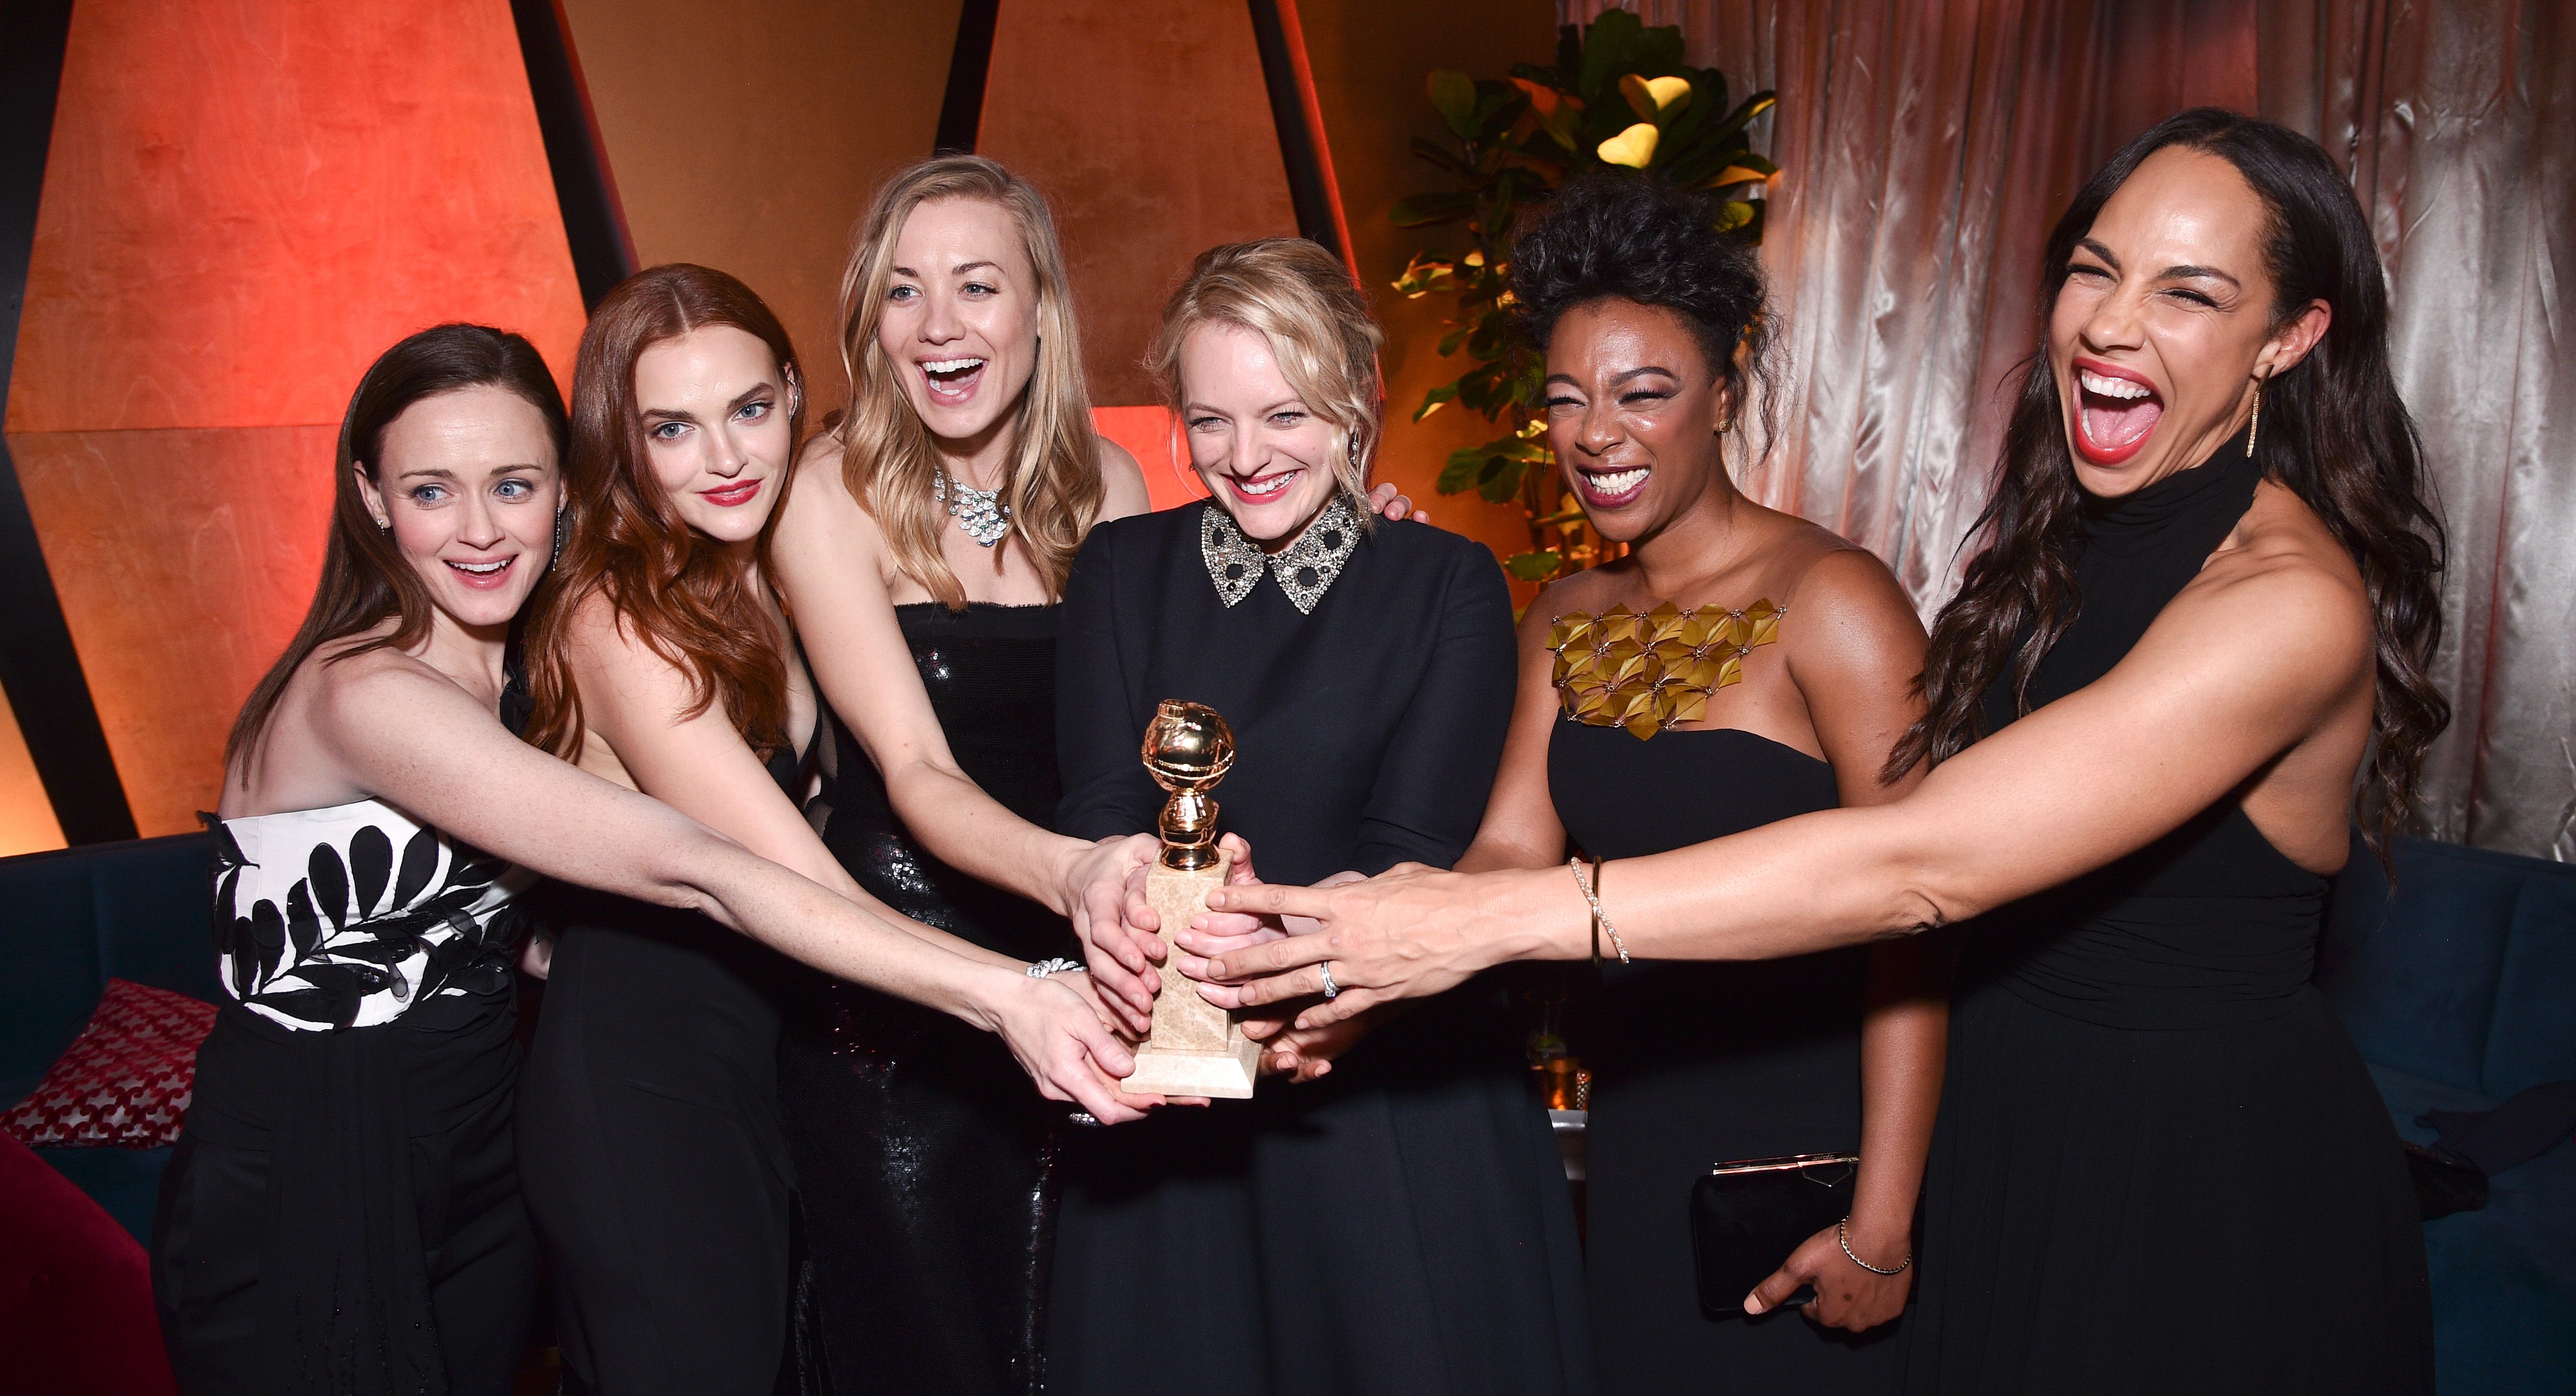 Amazing Candid Photos From The Golden Globes After Parties The Shutterstock Blog